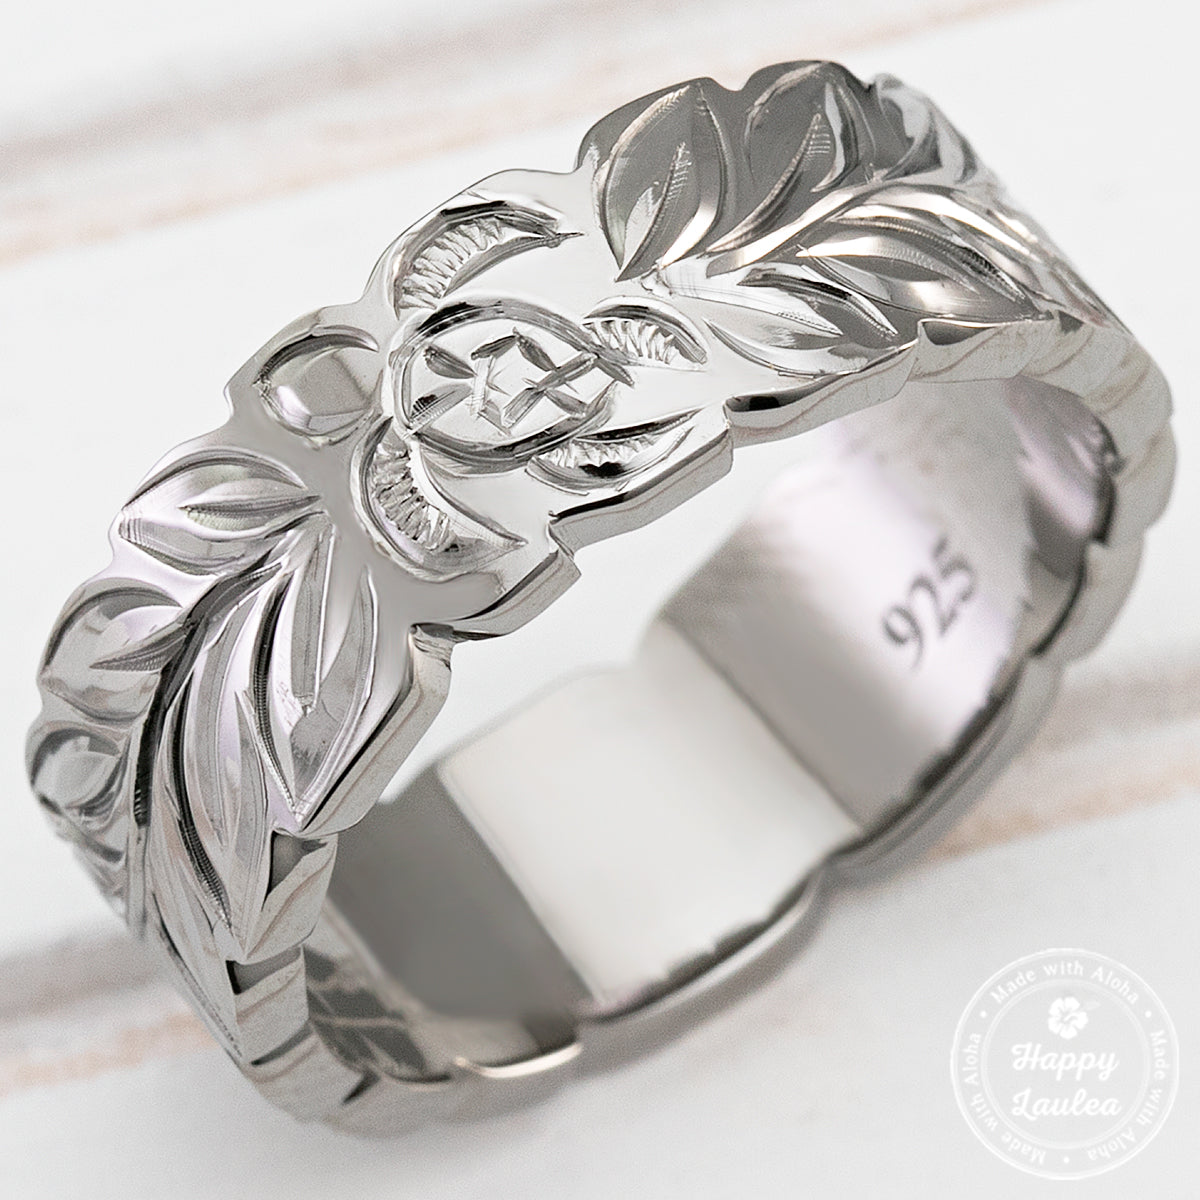 Black Rhodium 925 Sterling Silver Hand Engraved Ring with Maile Leaf & Hawaiian Sea Turtle Design - 8mm, Flat Shape, Comfort Fitment